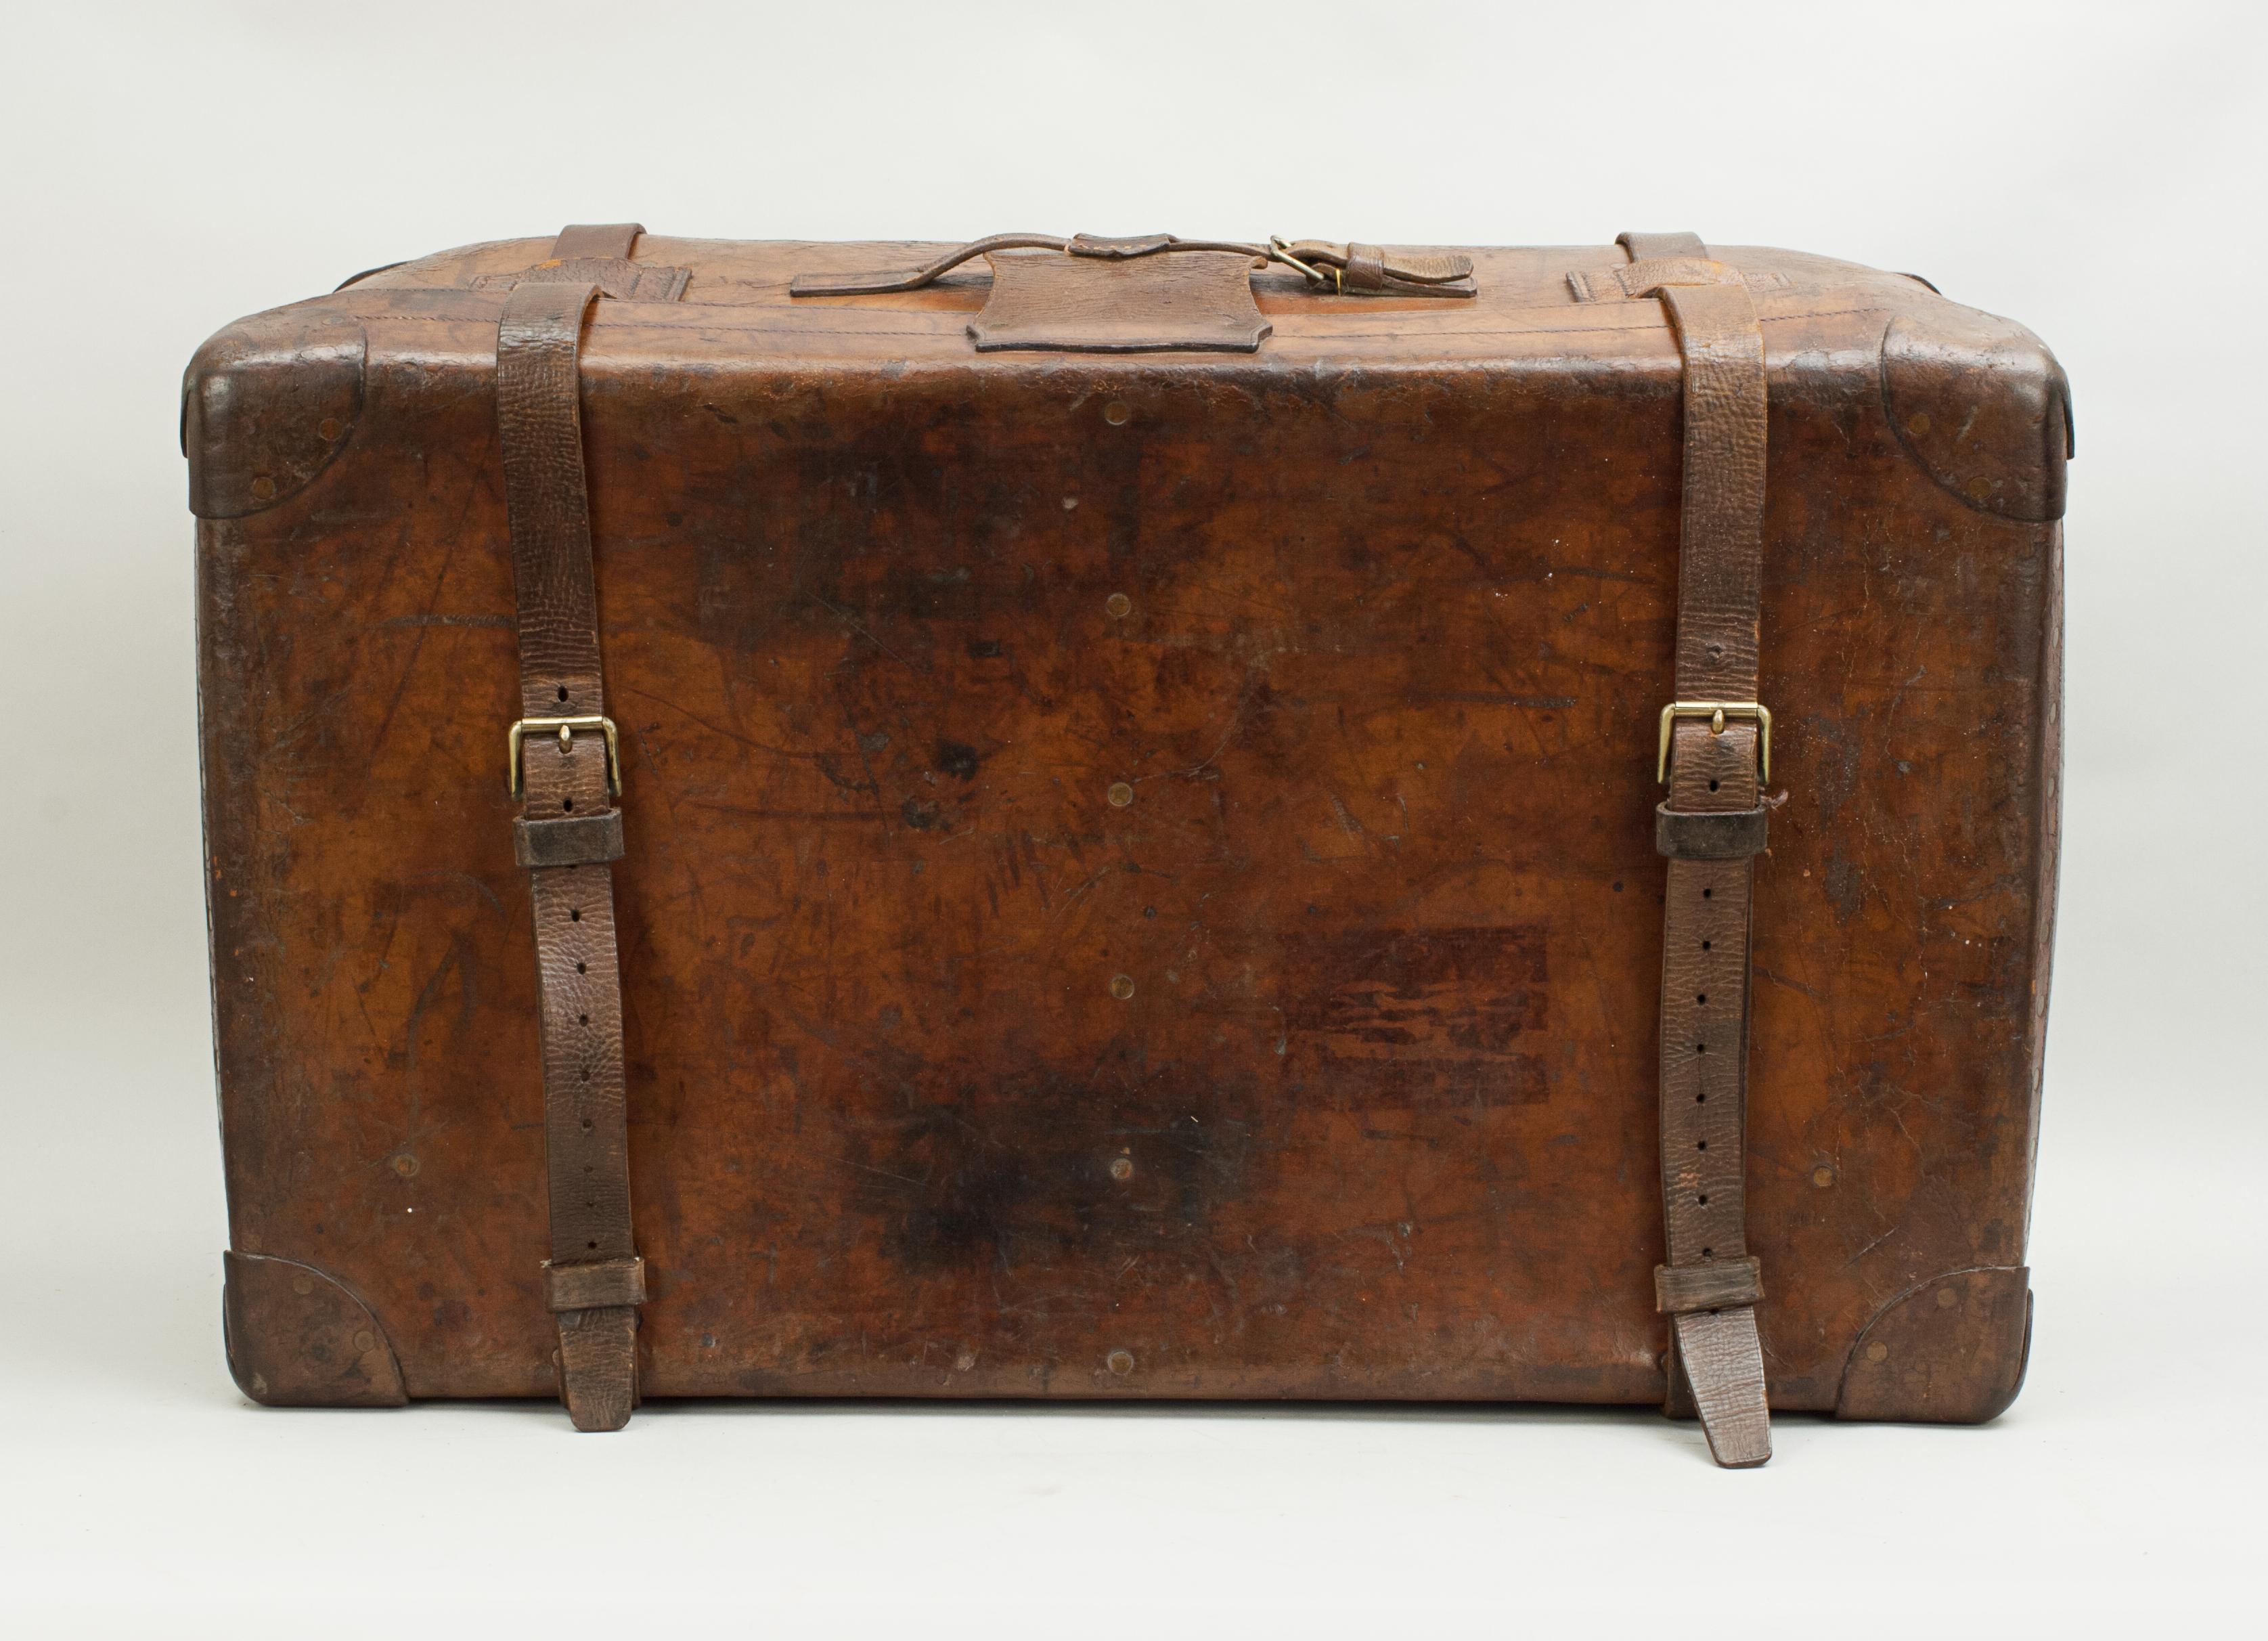 Antique Leather Trunk by Finnigans, Bond Street, London Luggage 6